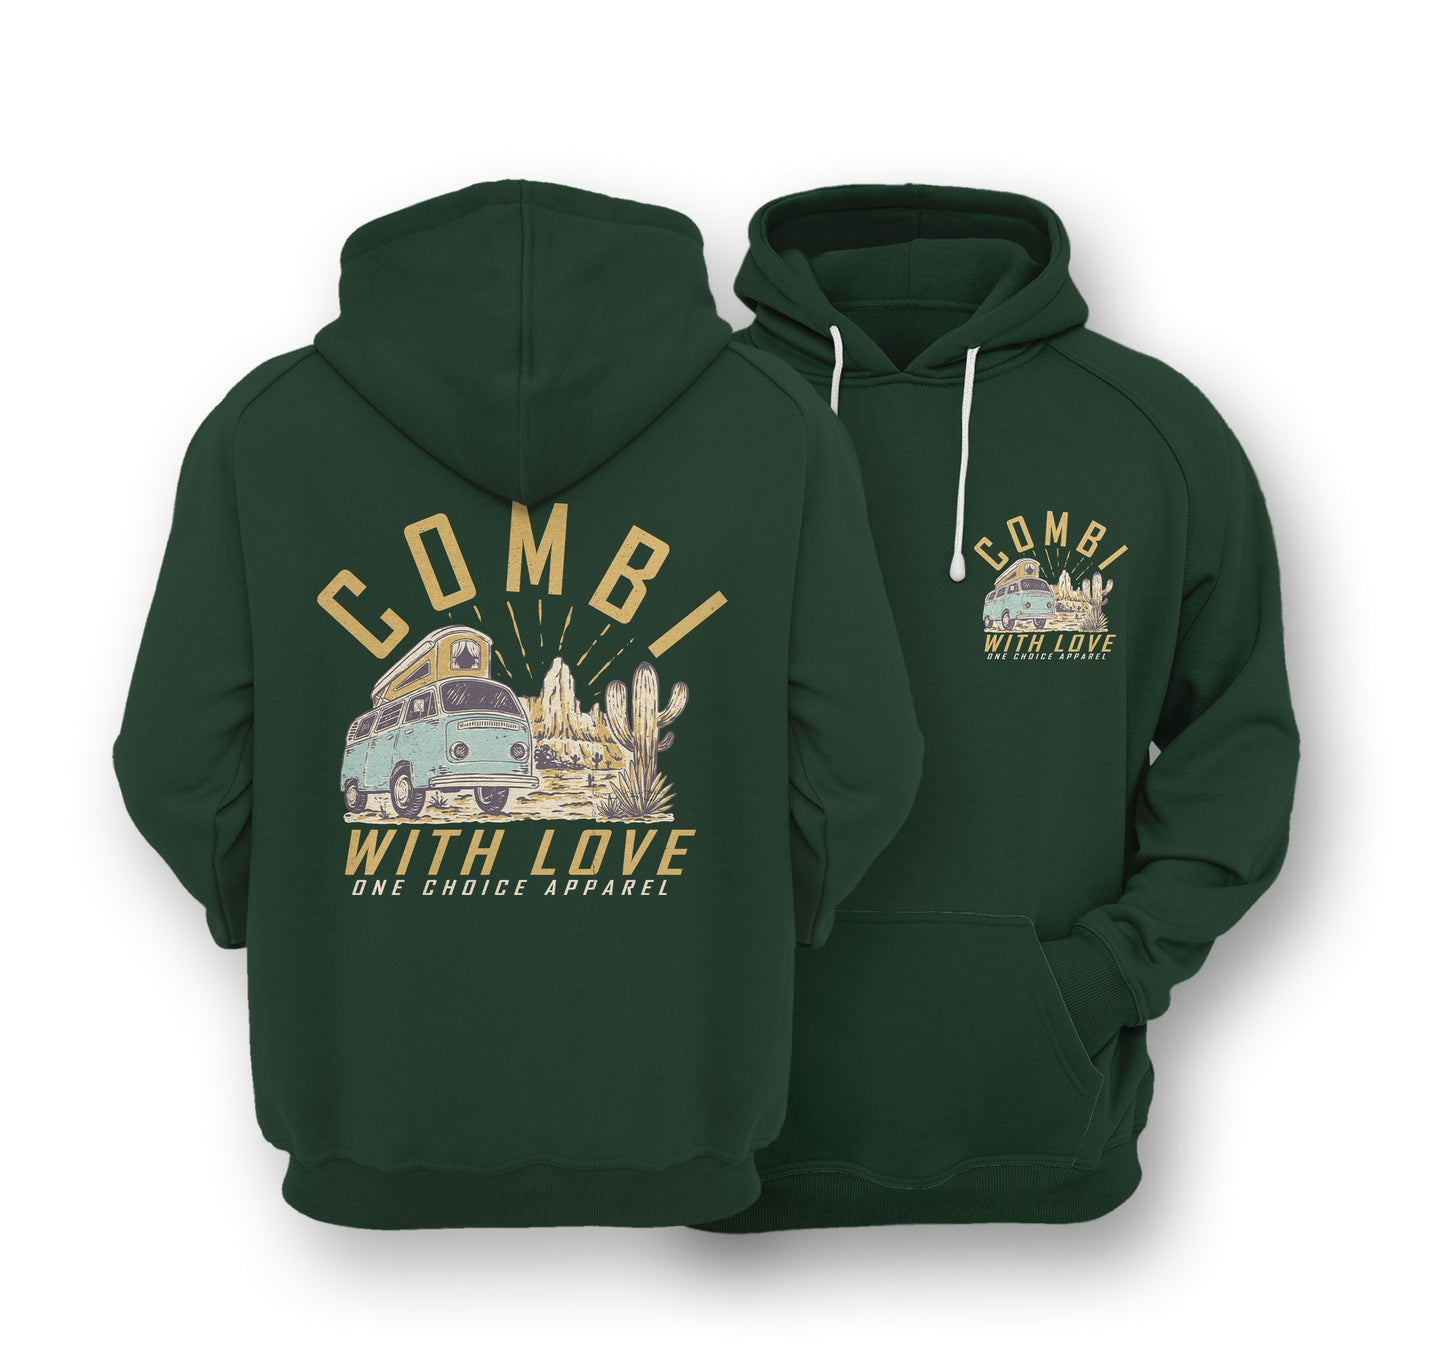 Sustainable Hoodie - Combi With Love